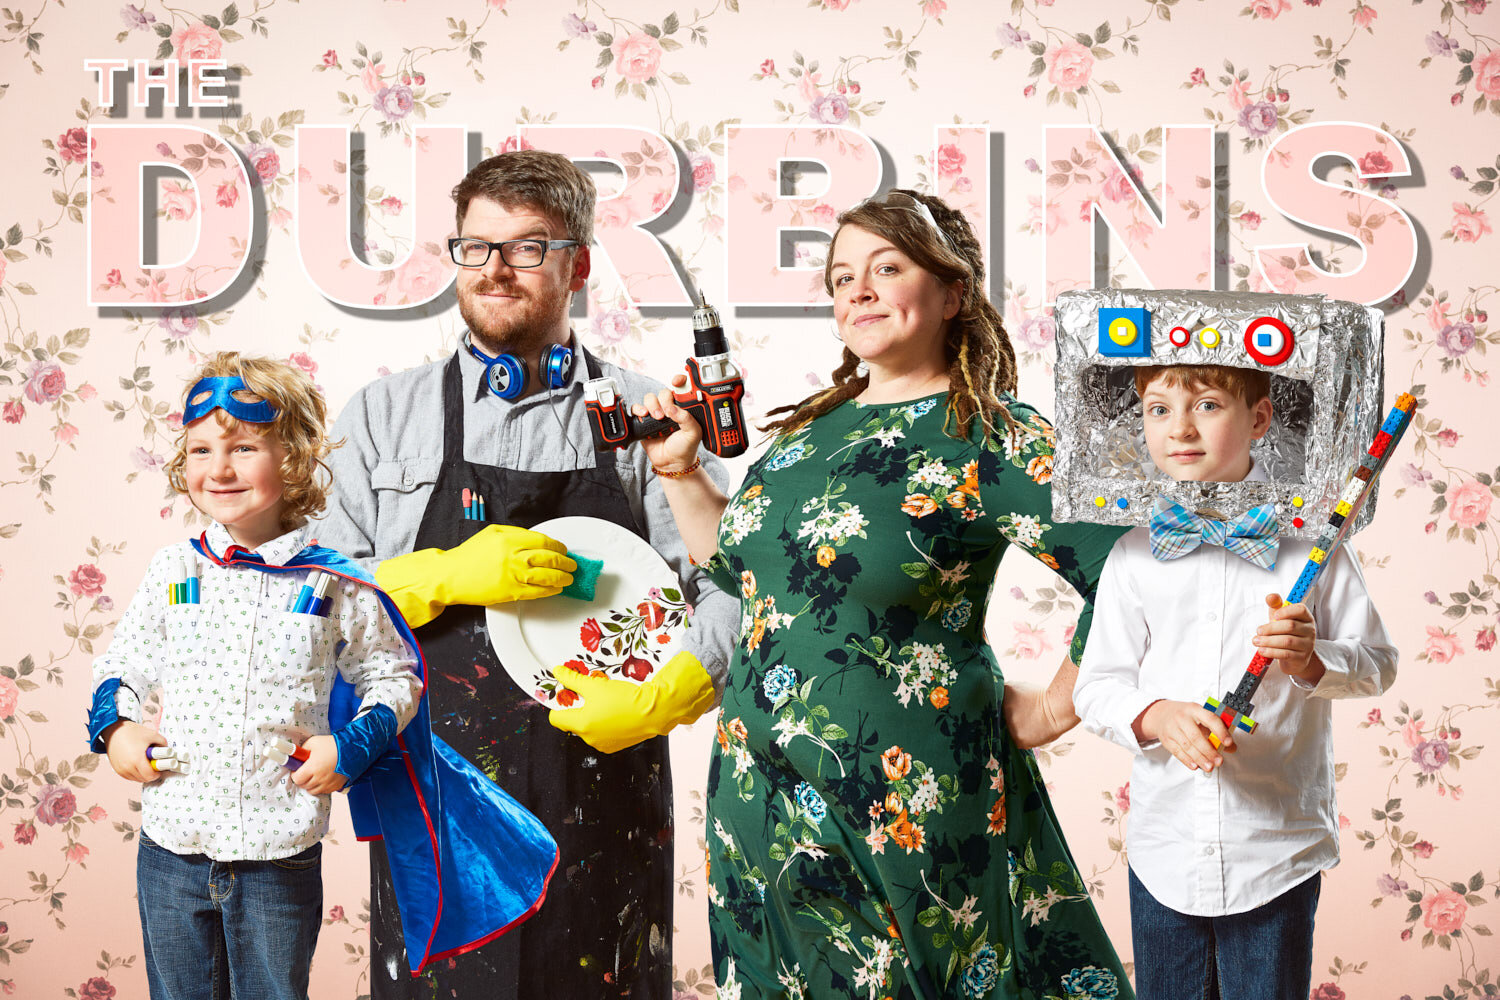 poster of artist family each wearing and holding items pertaining to their interests with vintage floral wallpaper 